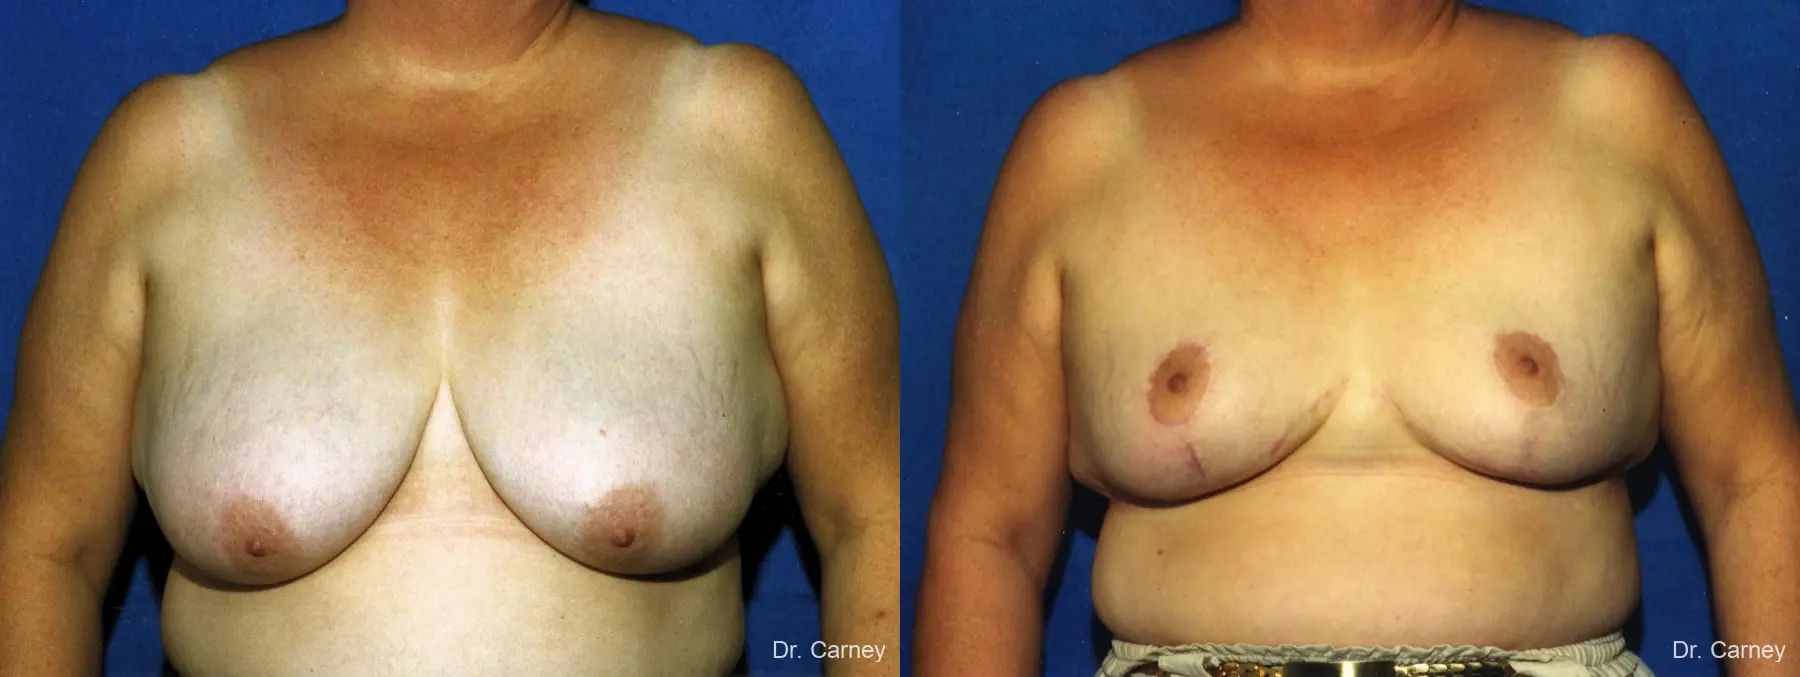 Virginia Beach Breast Reduction 1234 - Before and After